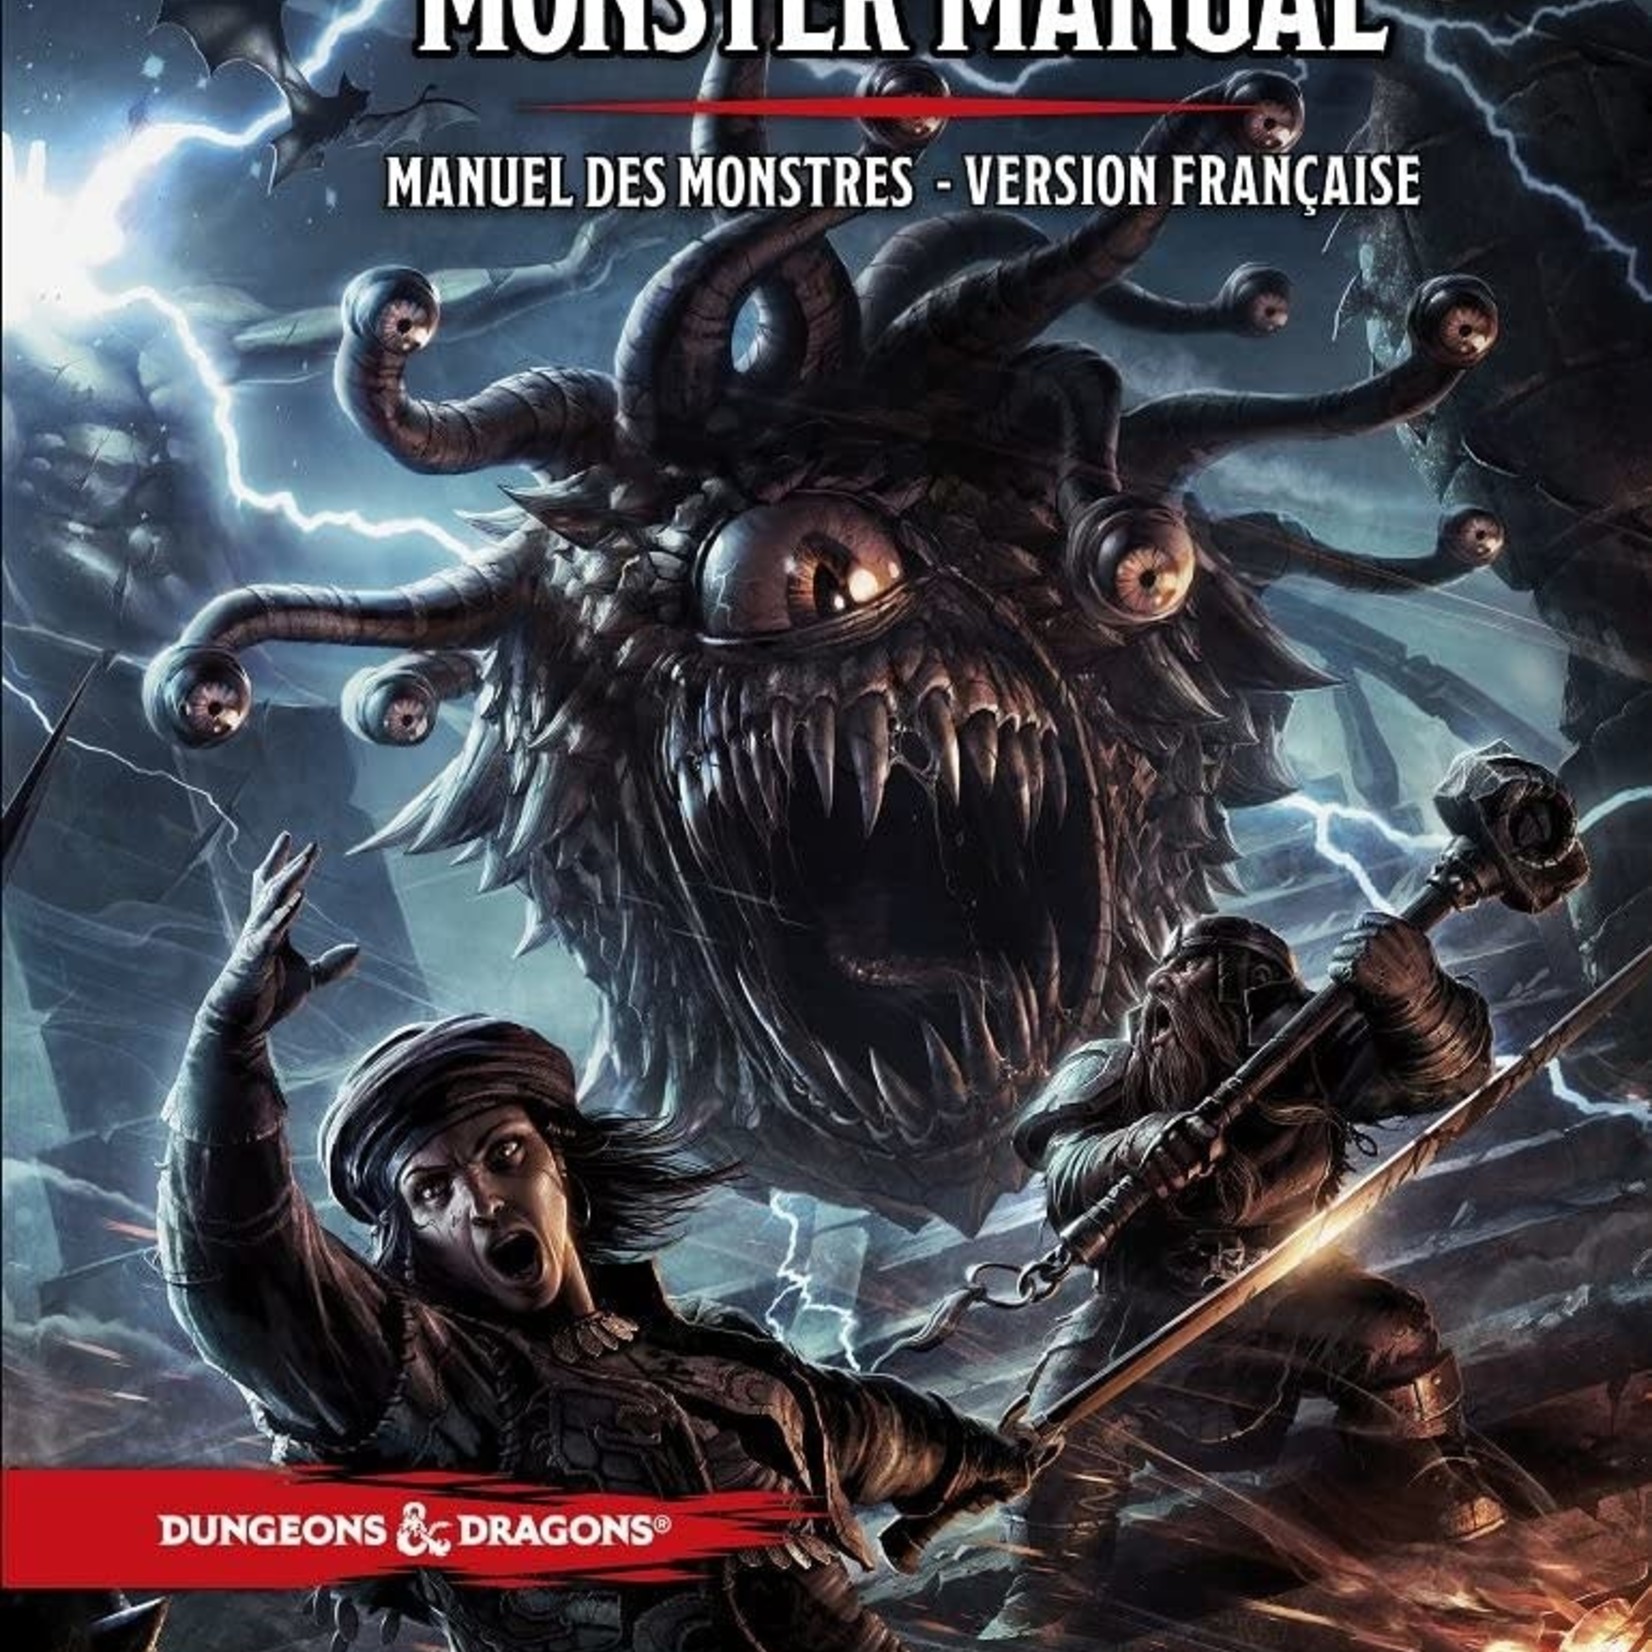 Wizards of the Coast Donjons & Dragons 5e édition - Manuel des monstres